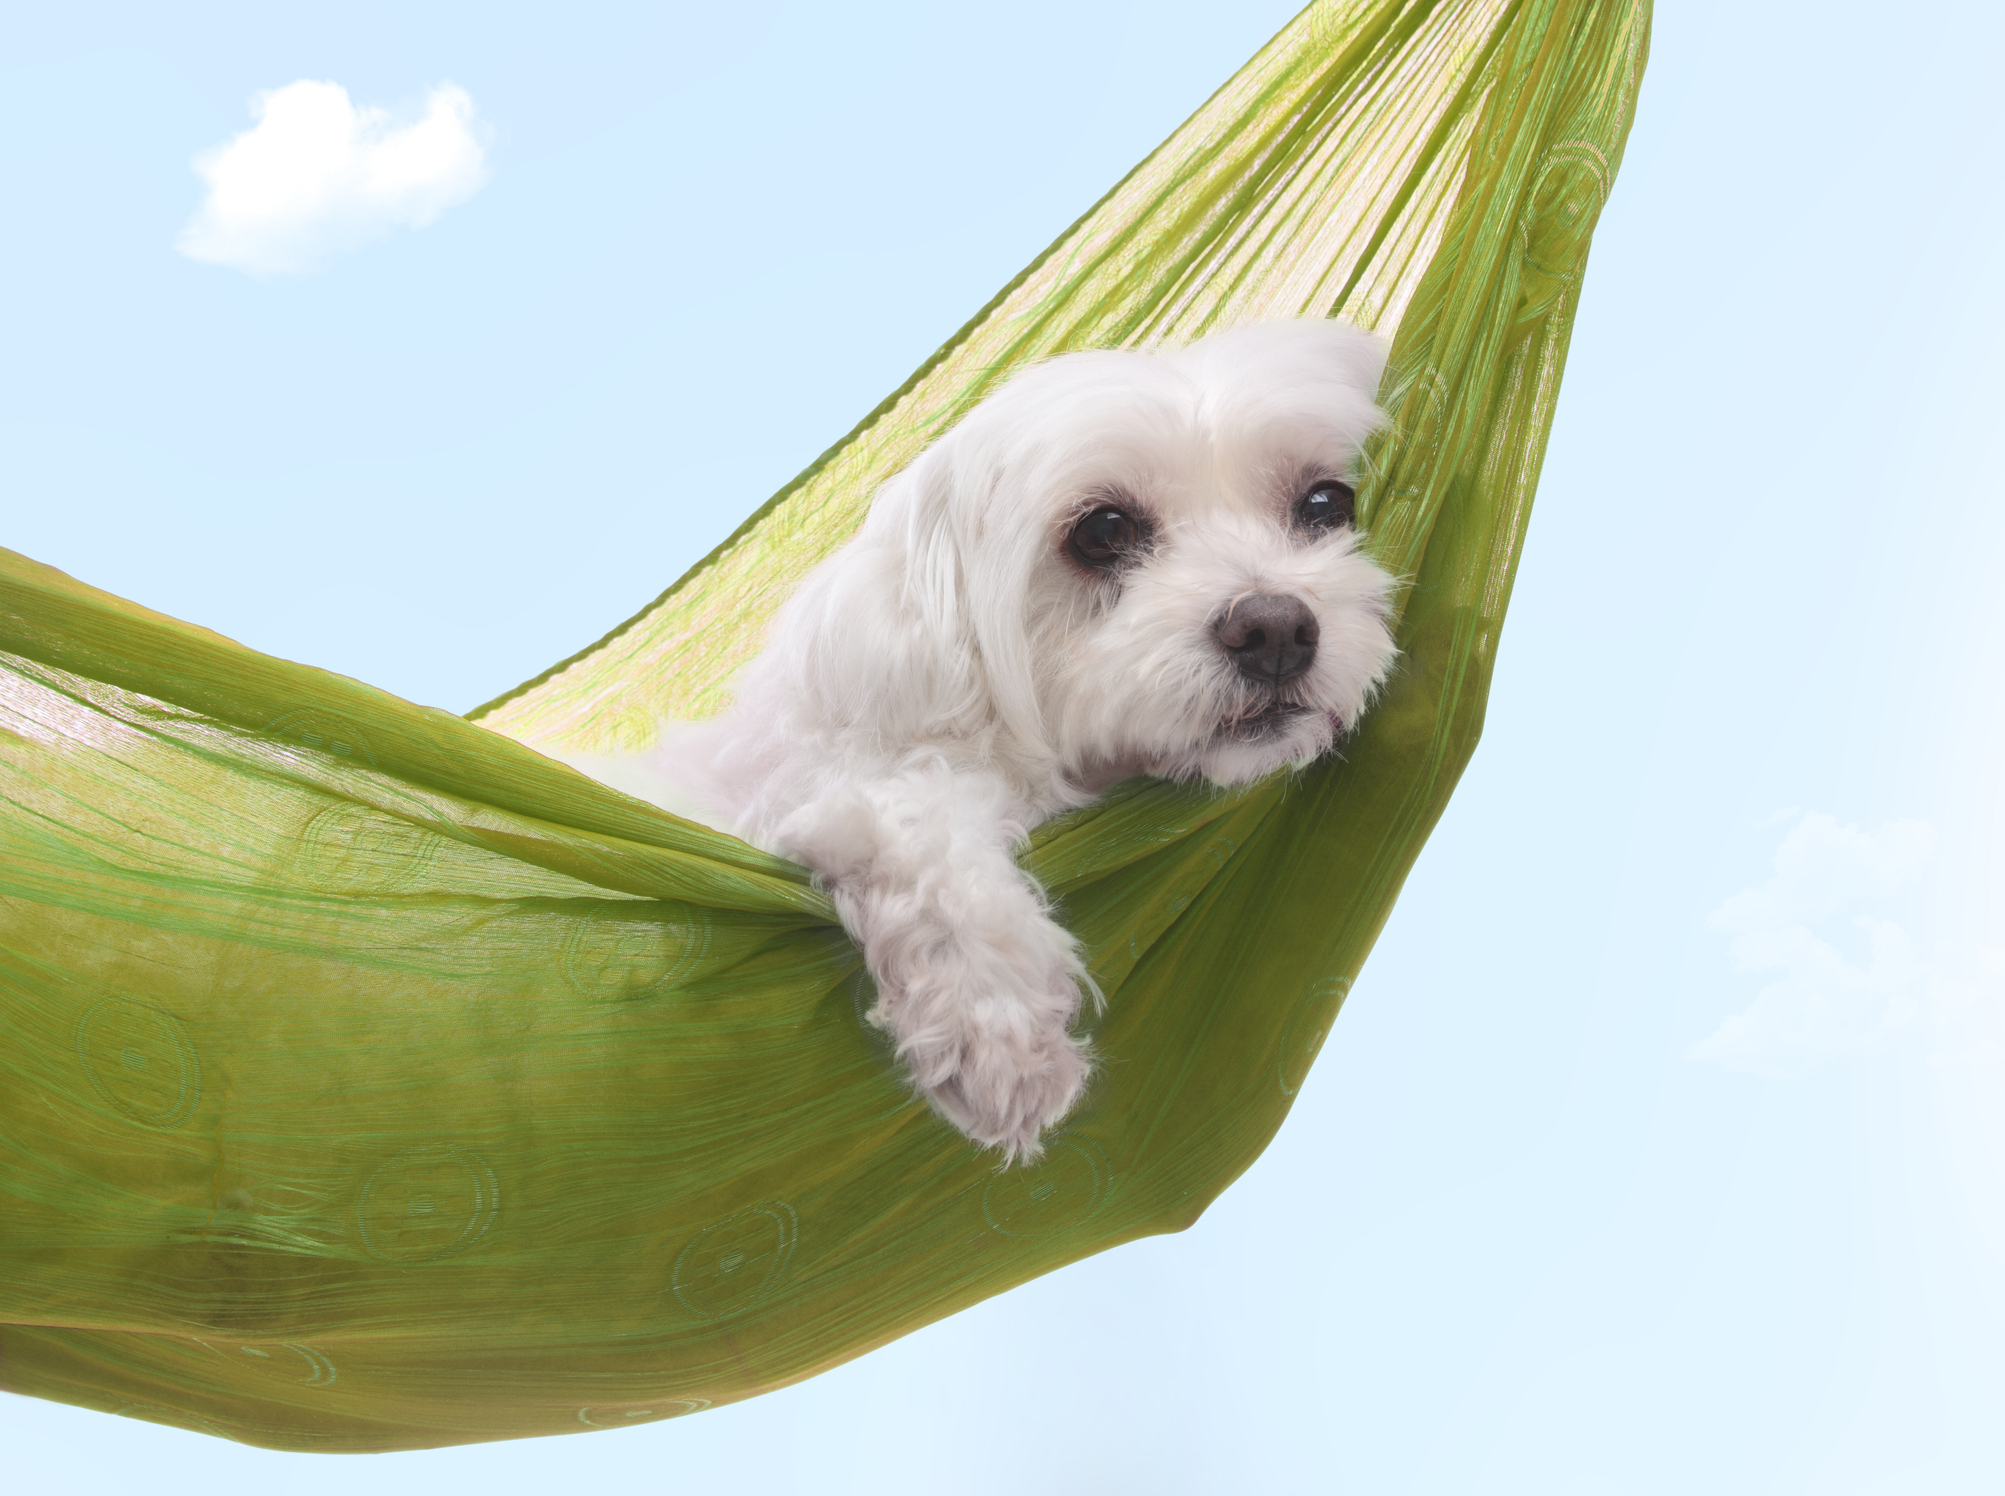 July Market Predictions – Prepare for the Dog Days of Summer